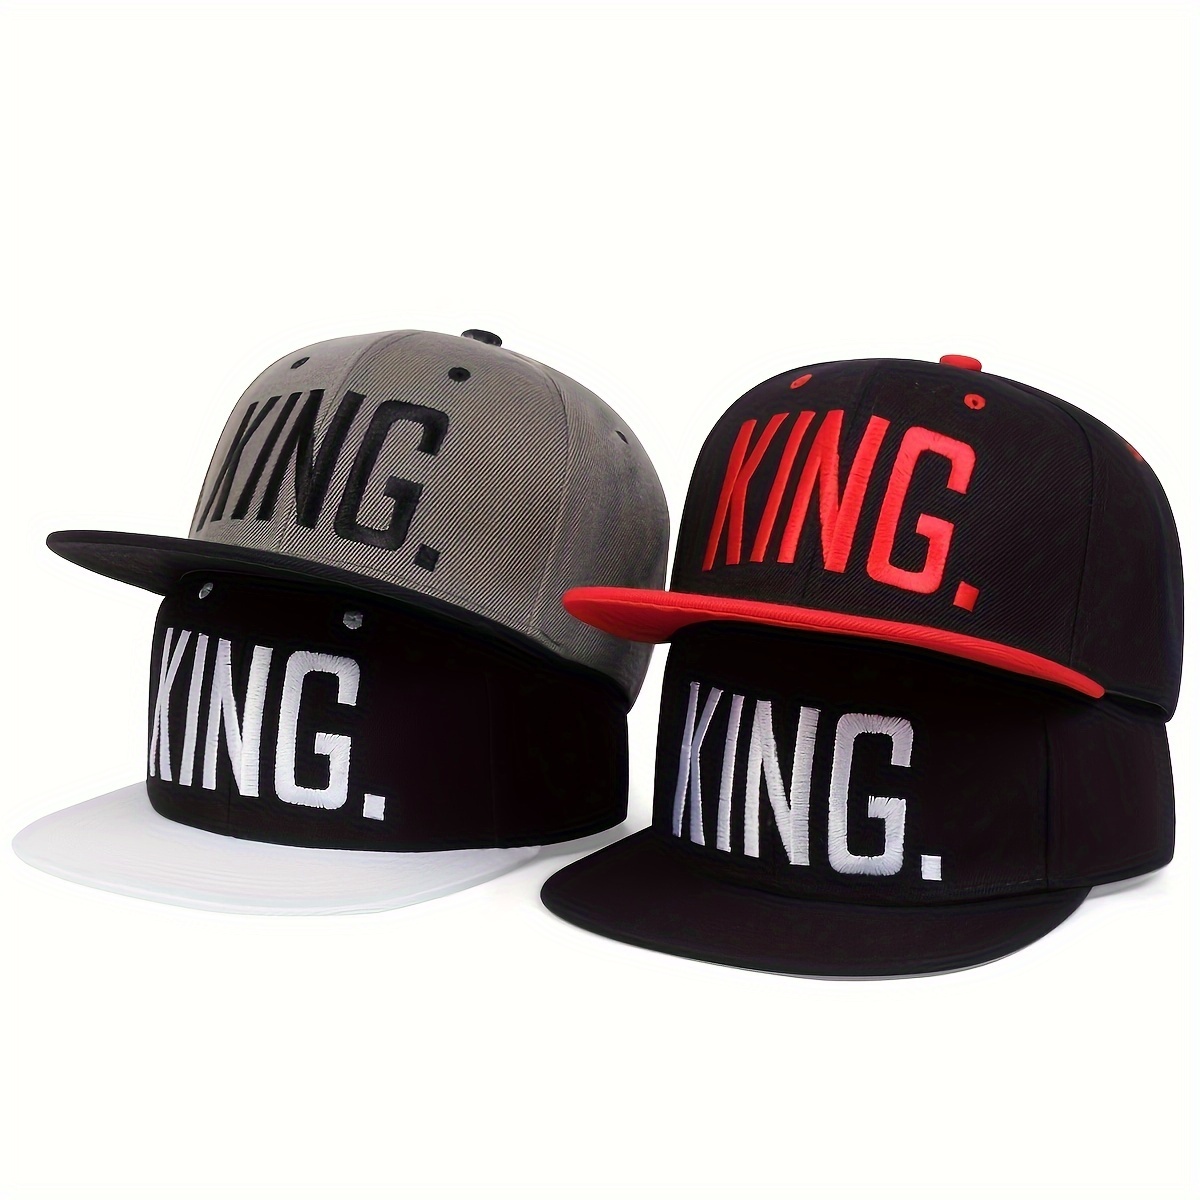 

King Embroidered Snapback Hat Hip Hop Color Block Unisex Baseball Cap Casual Sunshade Dad Hats For Women Men